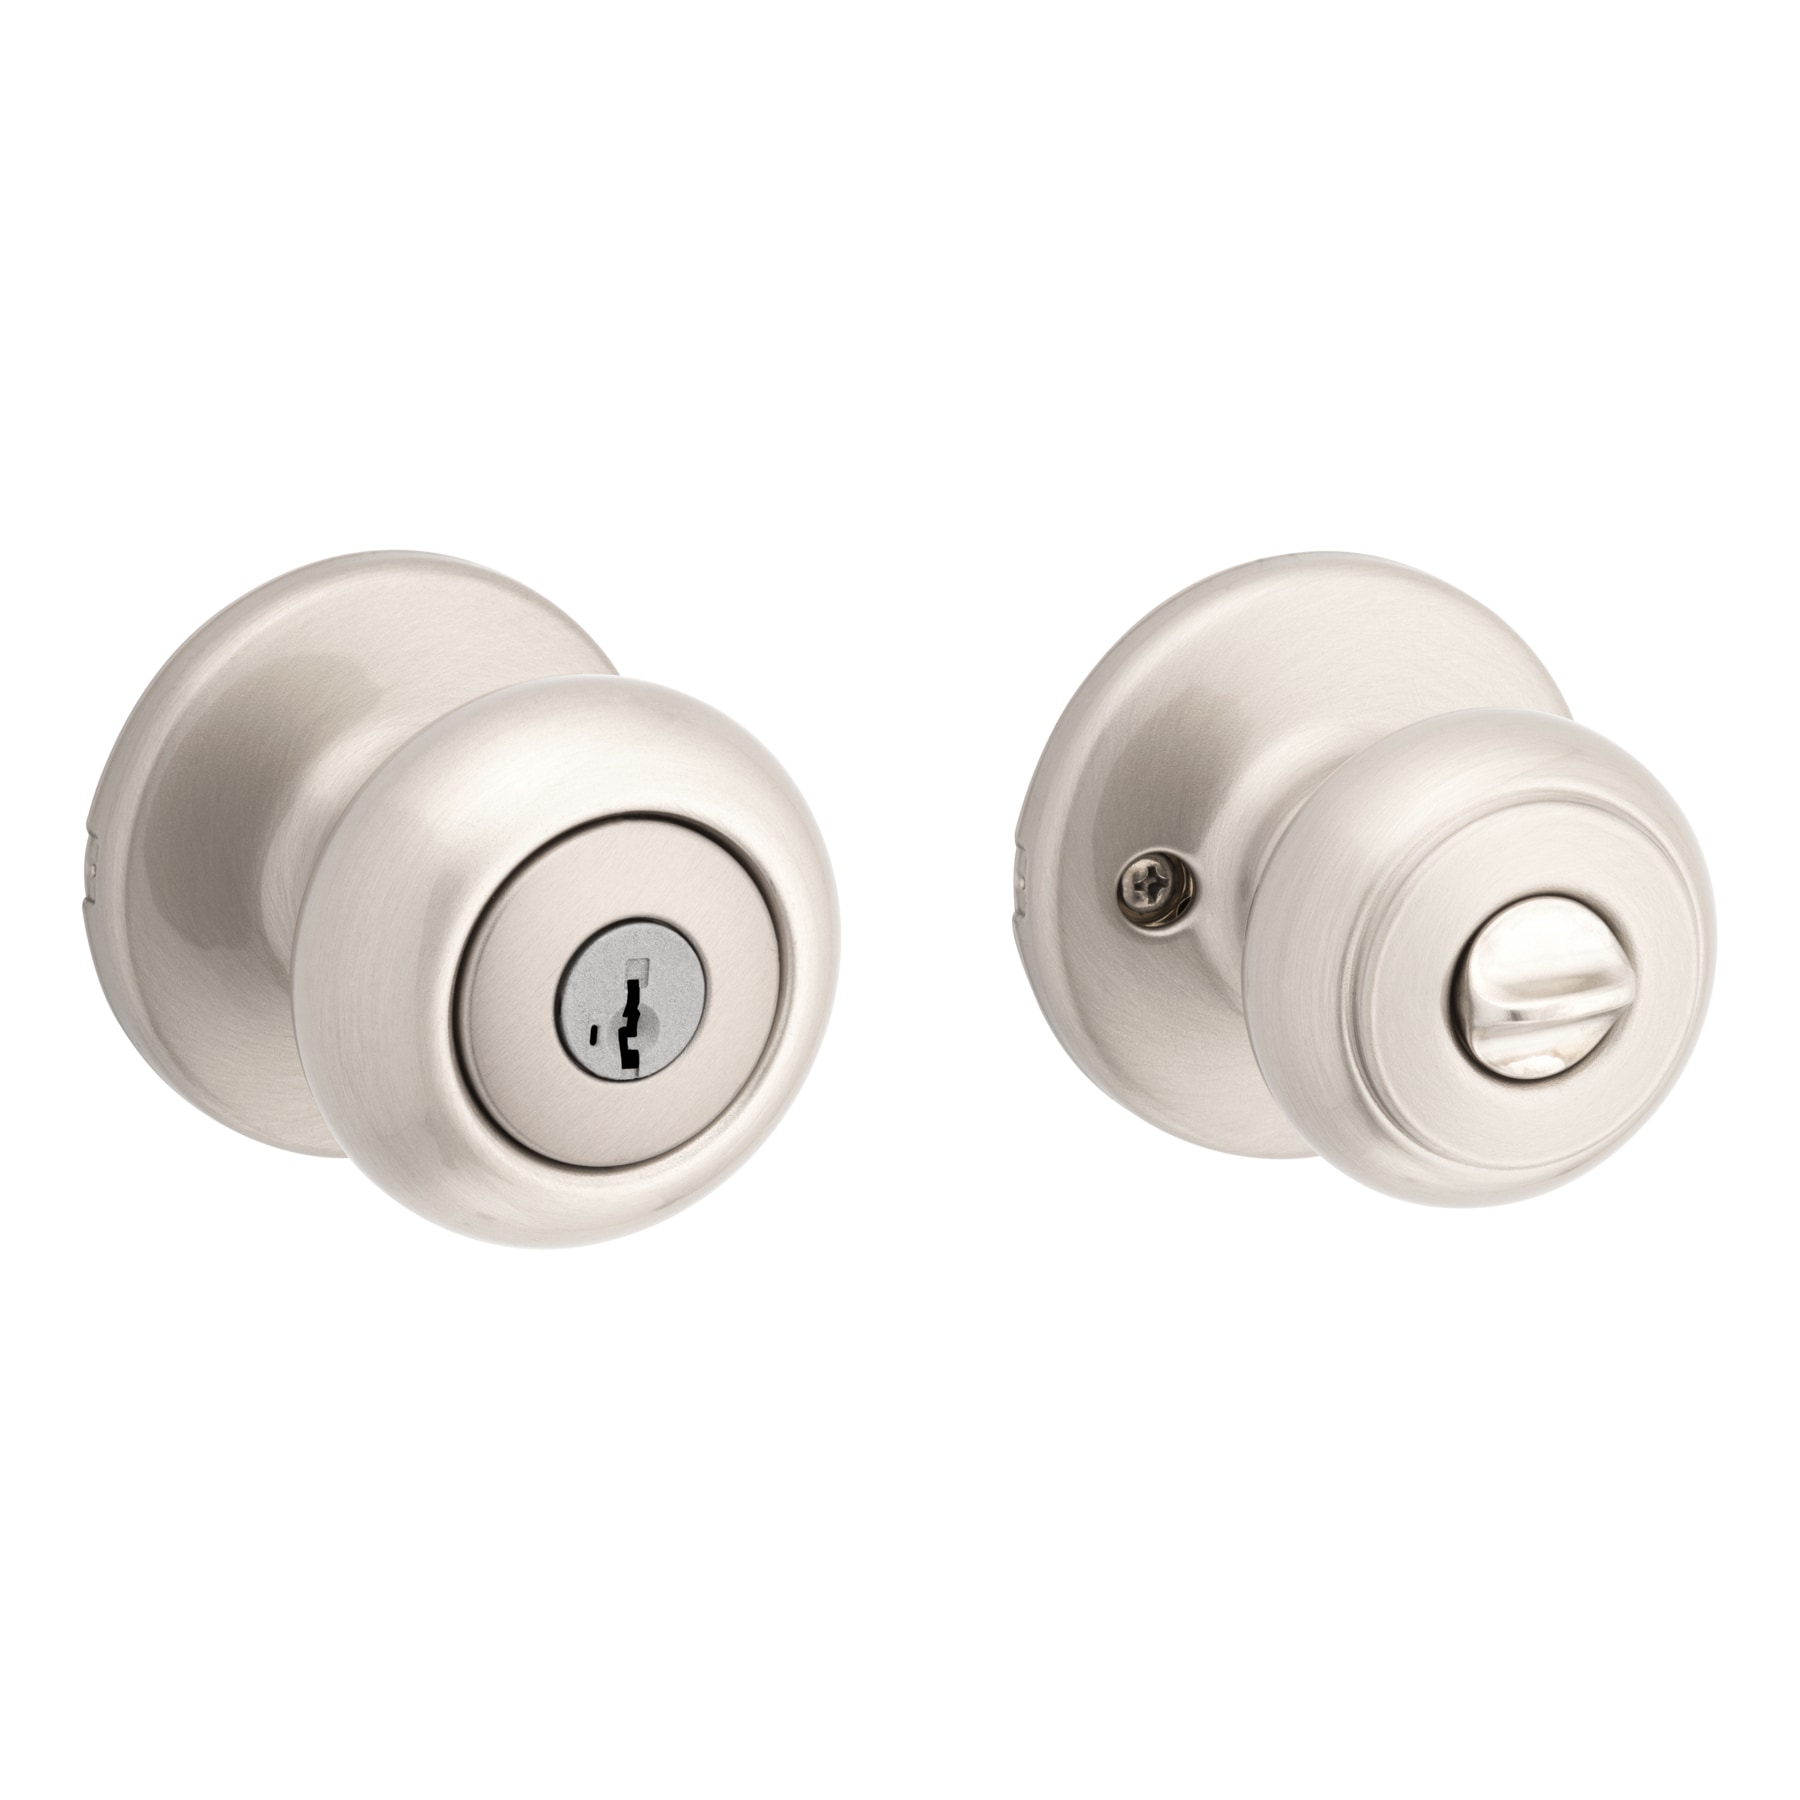 Kwikset Series Cove Satin Nickel Smartkey Exterior Keyed Entry Door Knob  with Antimicrobial Technology in the Door Knobs department at